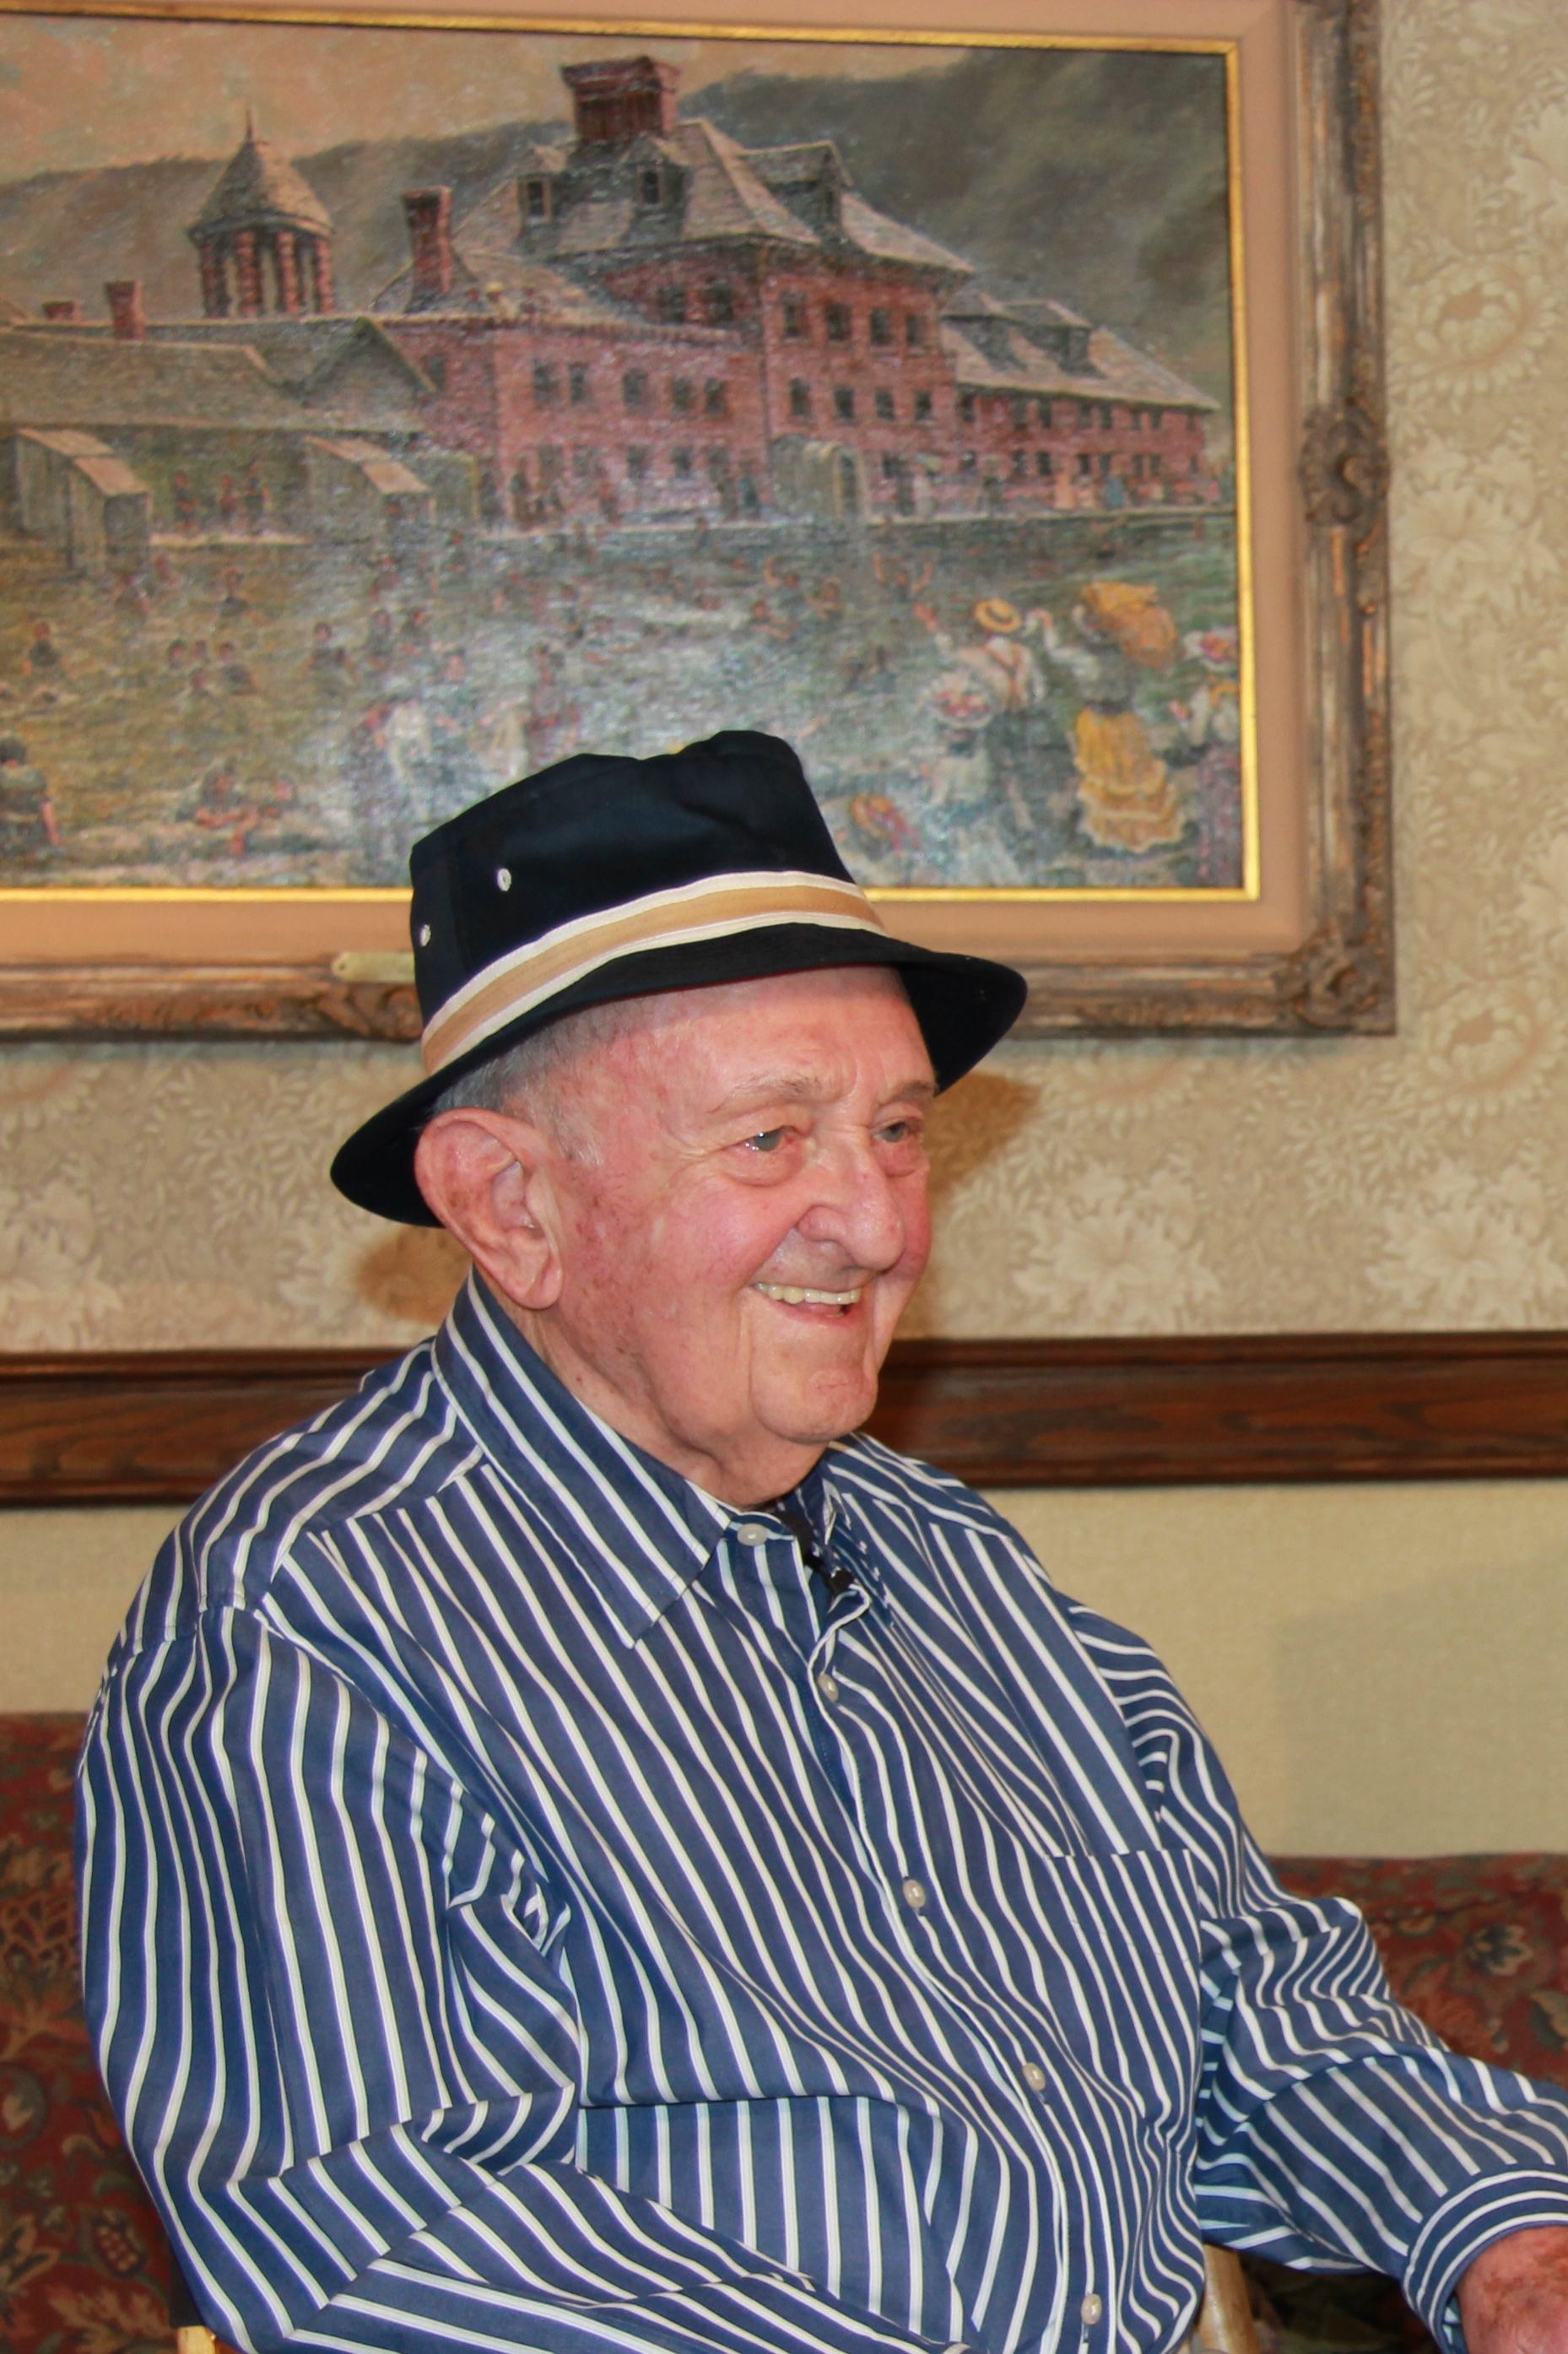 Hank Bosco at the 125th anniversary of Glenwood Hot Springs in 2012